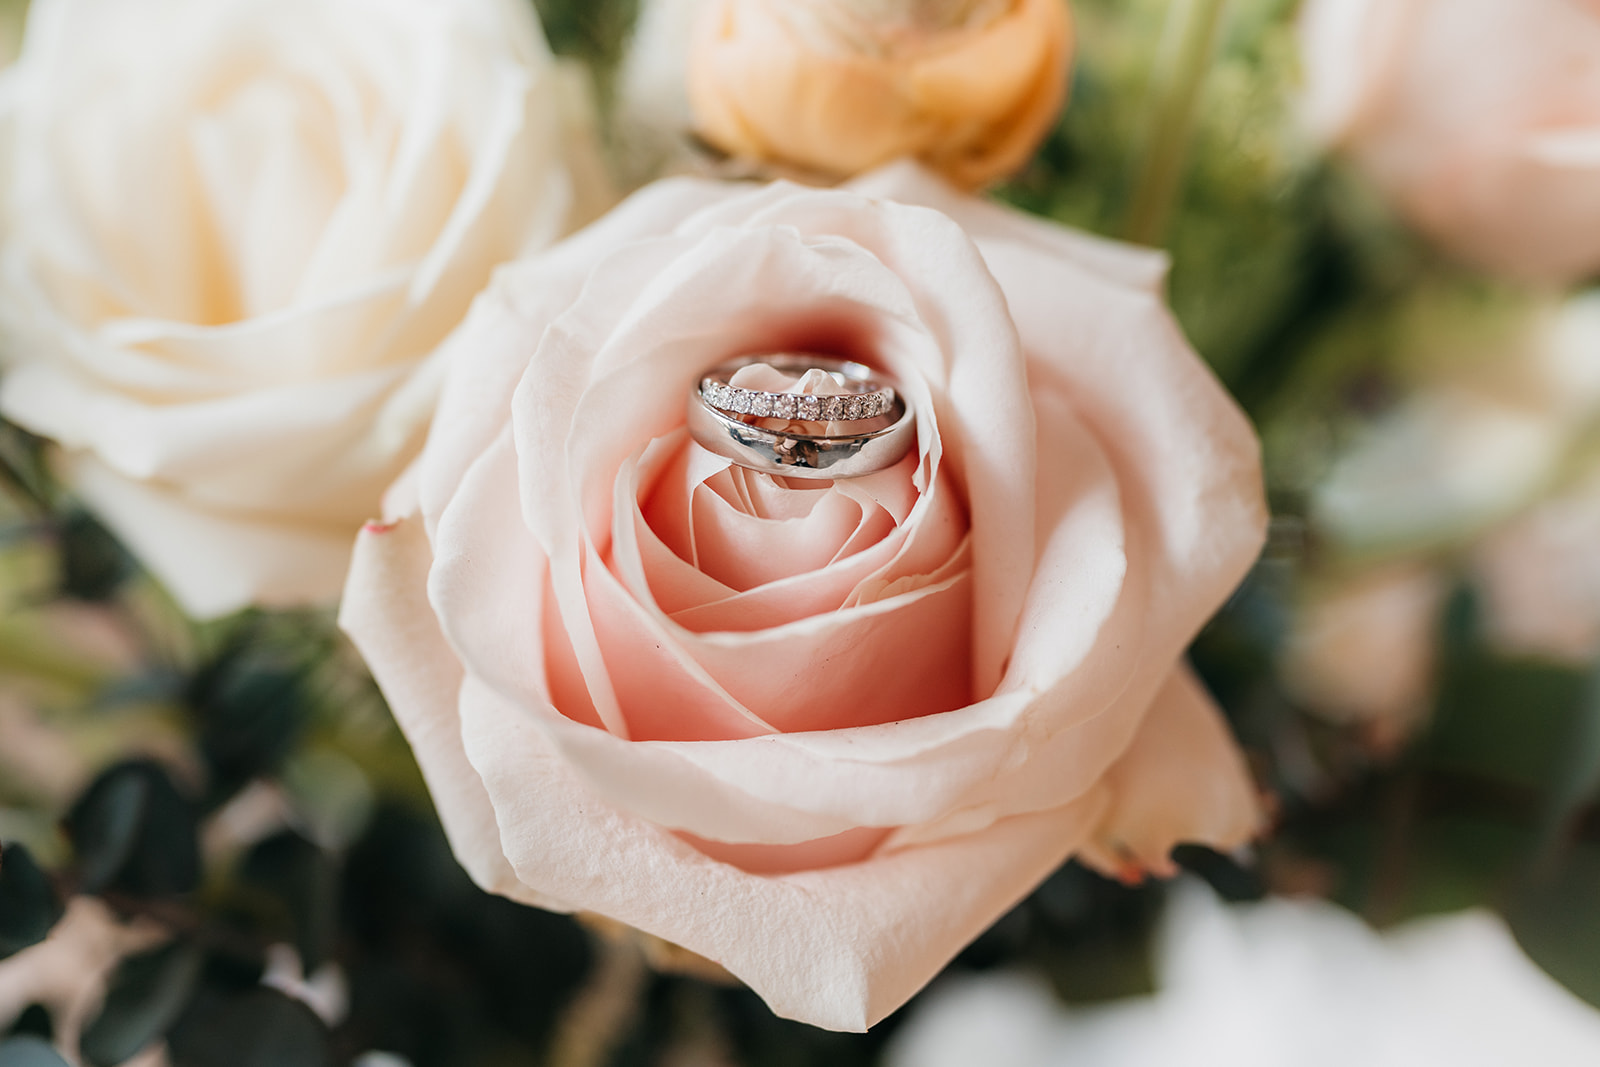 detail photograph of an engagement ring in a flower